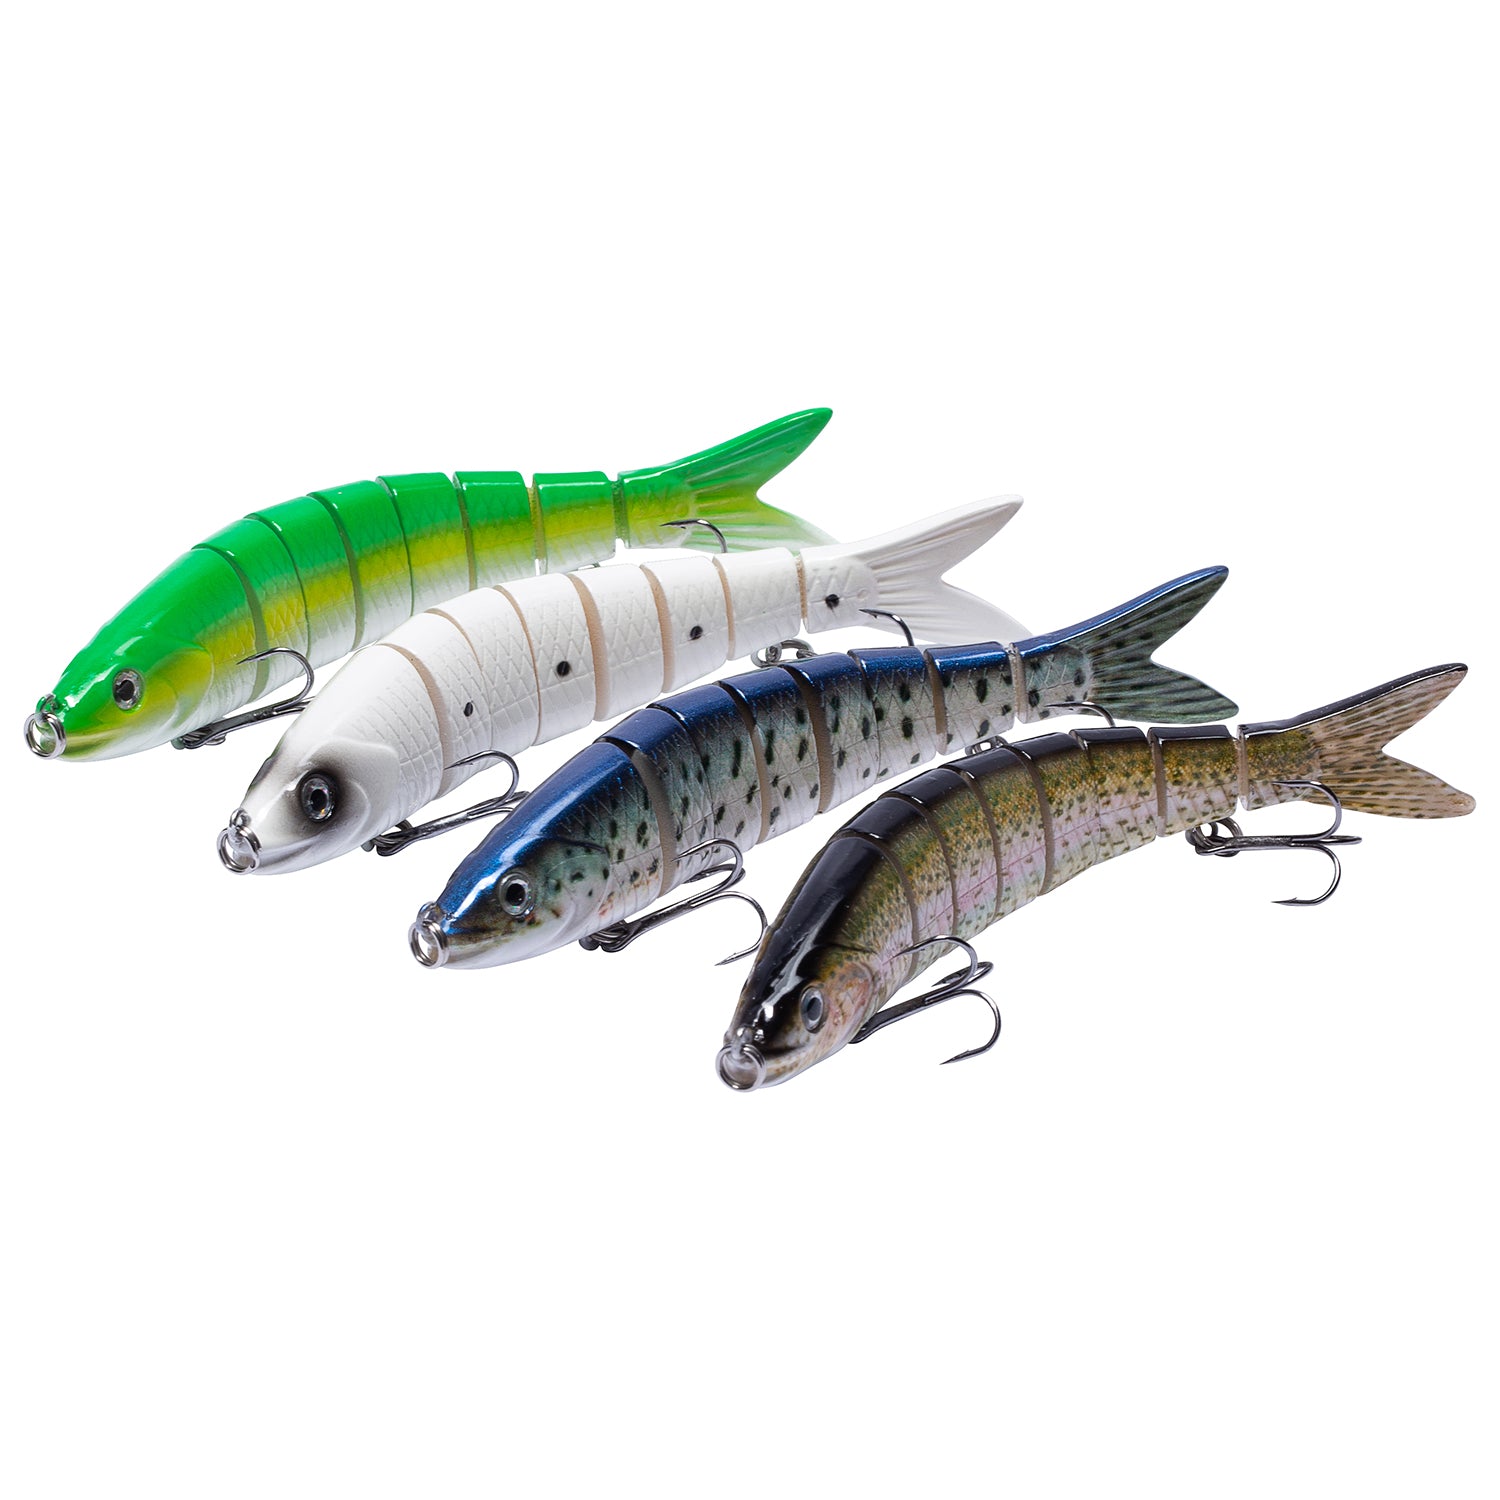 Fishing Lures for Bass Trout Segmented Multi Jointed Baits Slow